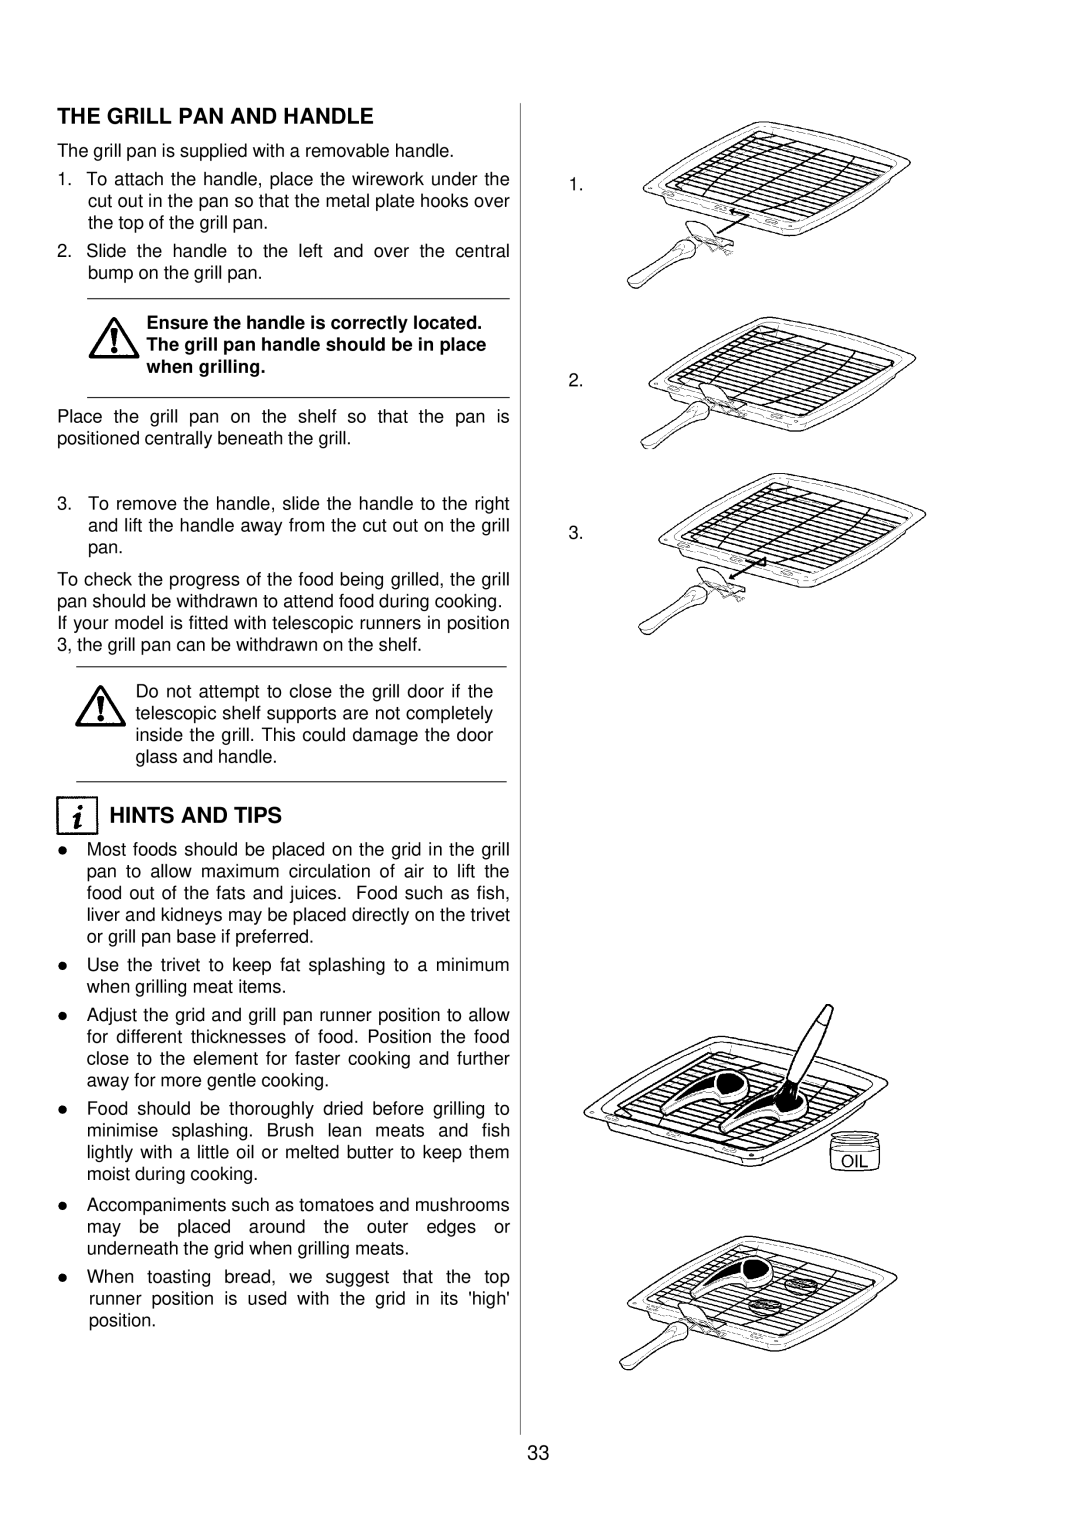 Electrolux D81005, D81000 installation instructions Grill PAN and Handle 